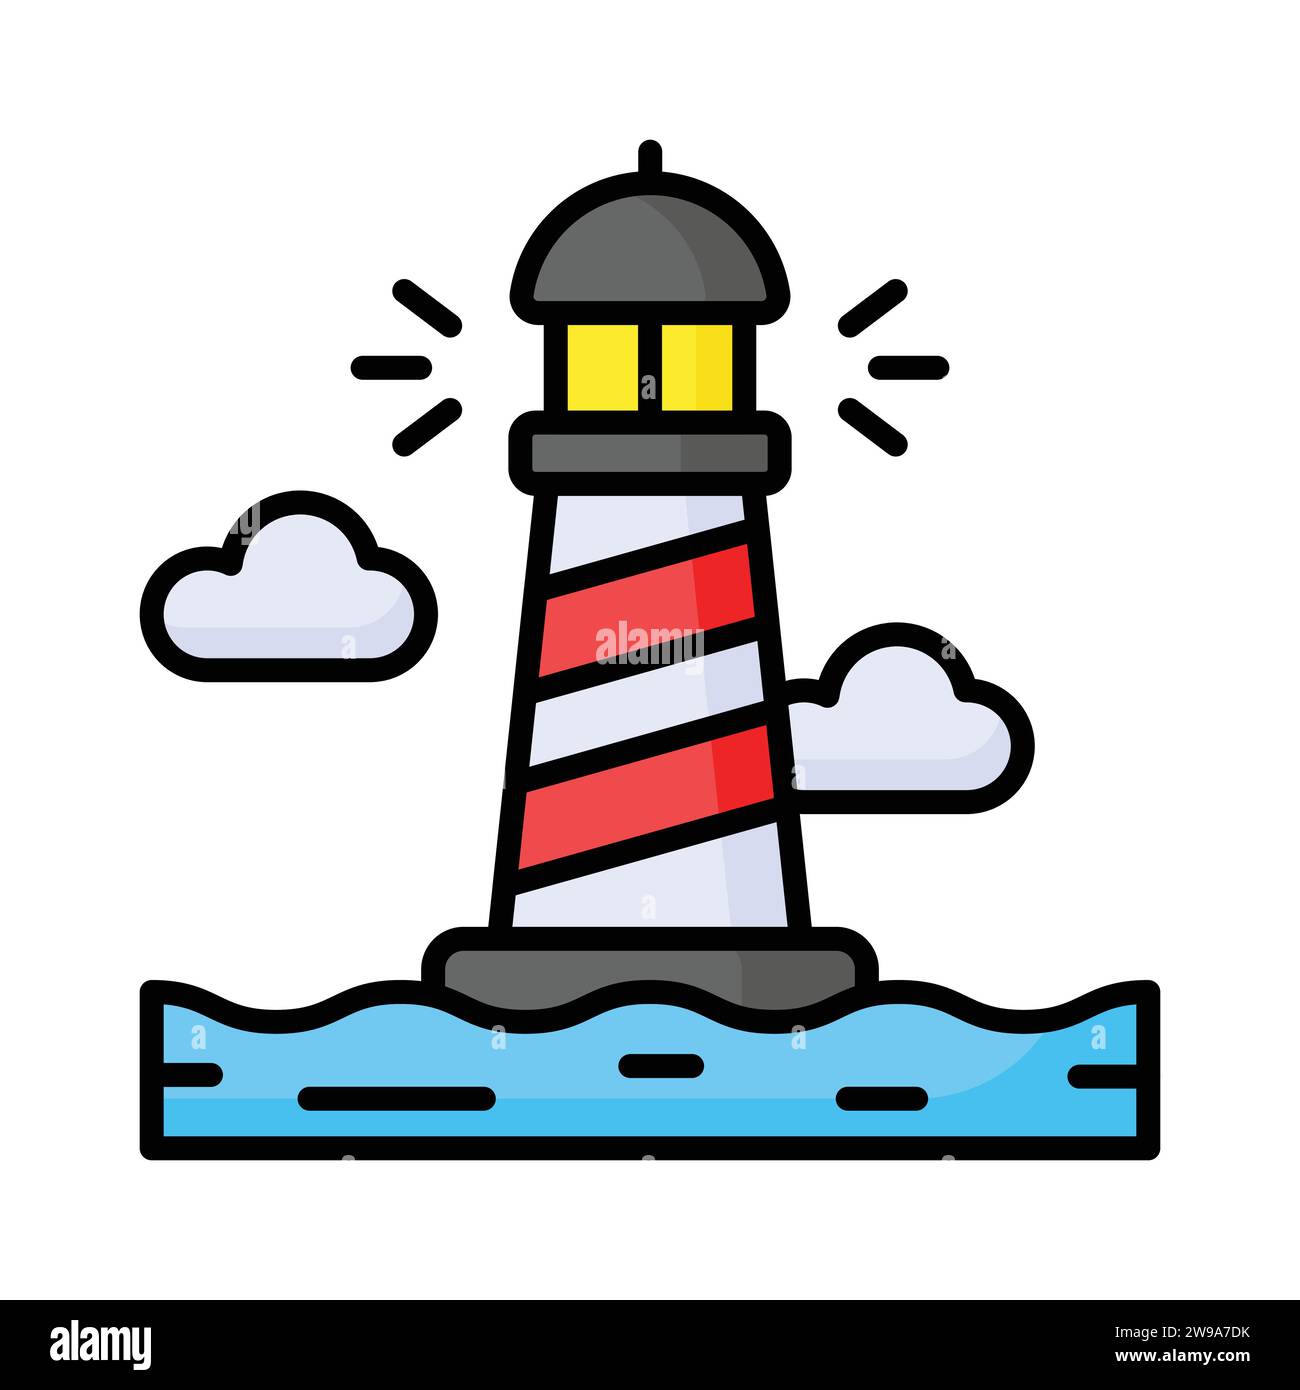 A tower containing a beacon light to warn or guide ships at sea, well designed icon of lighthouse Stock Vector